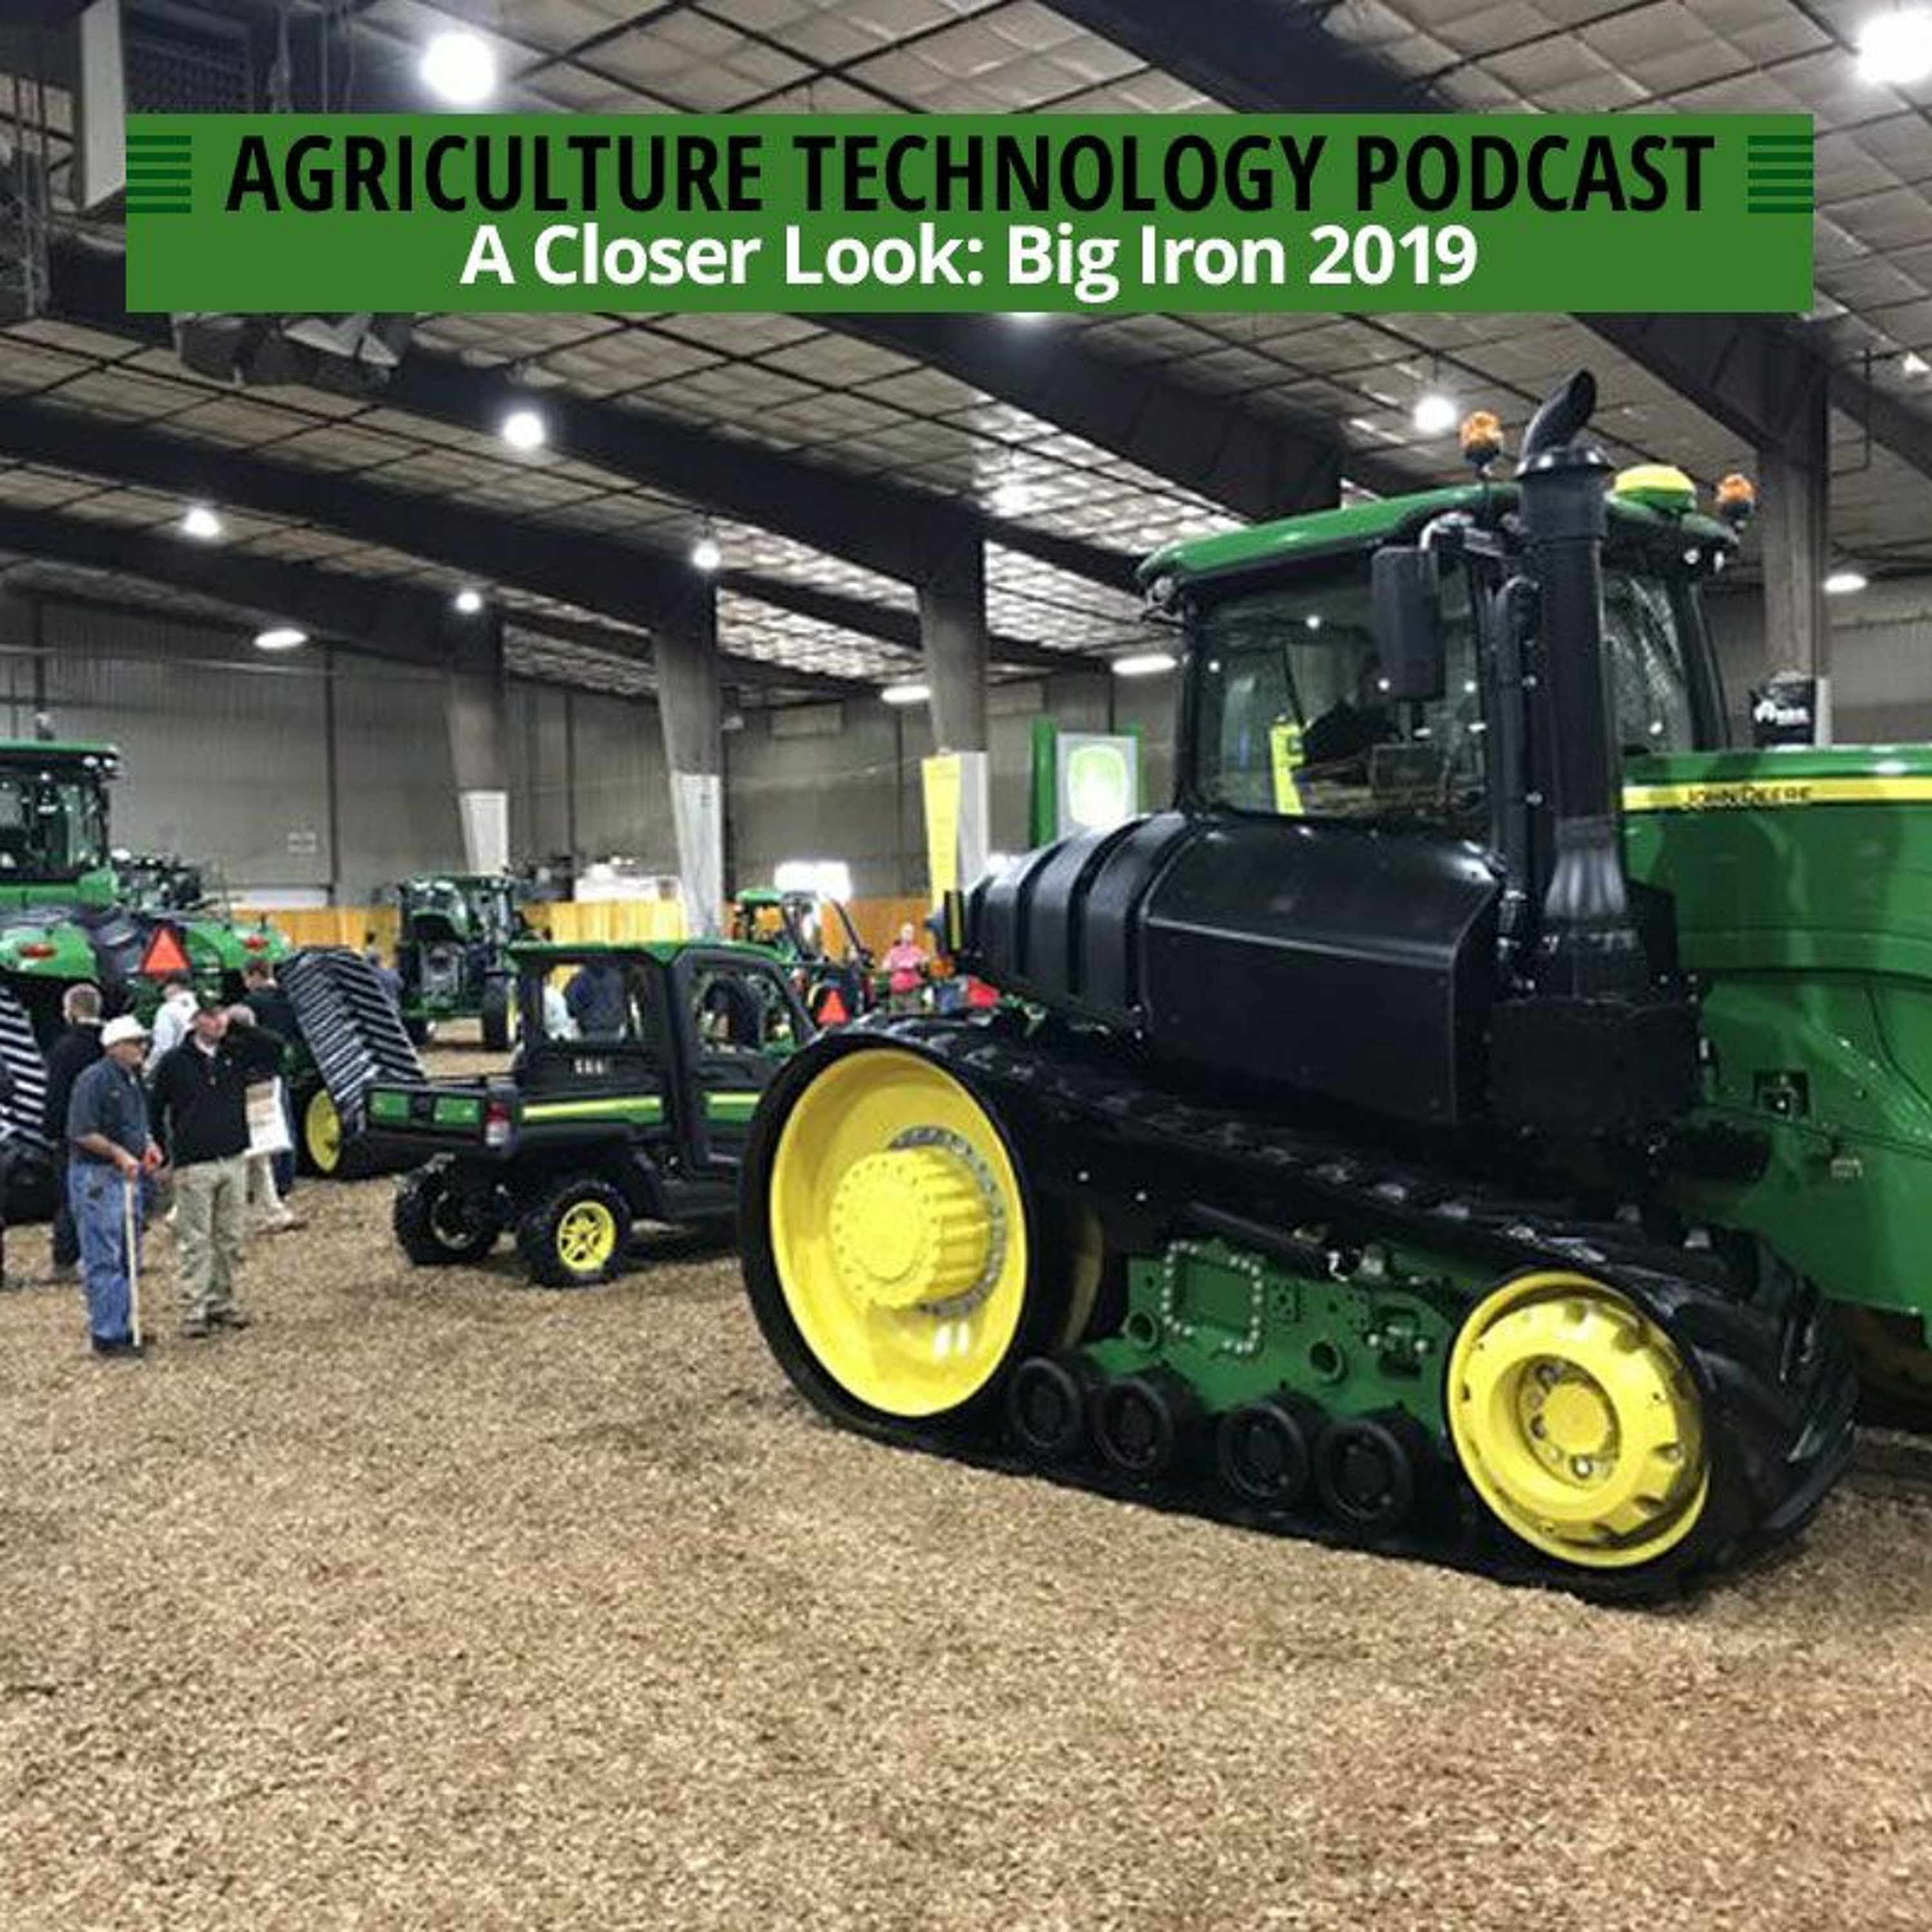 Agriculture Technology Podcast: A Closer Look: Big Iron 2019